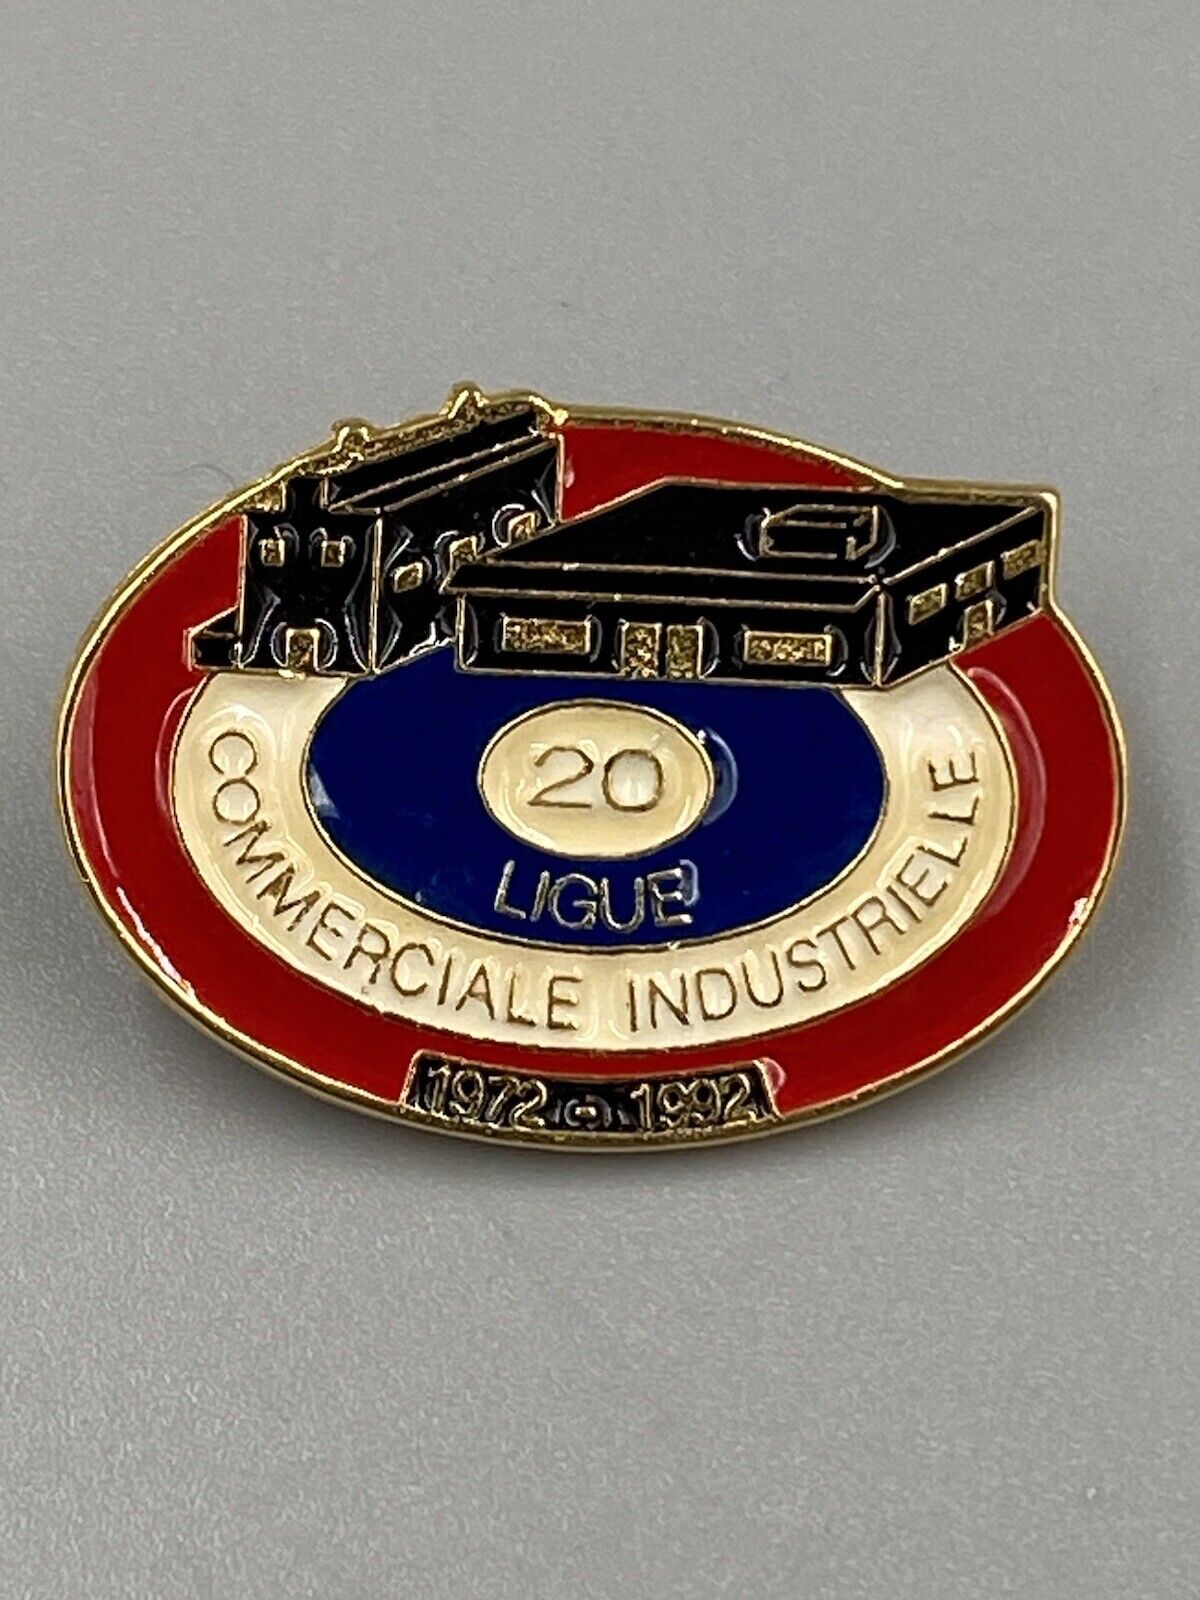 Vintage 20th Anniversary 20 LIGUE 1972-1992 Commercial Industries Lapel Pin